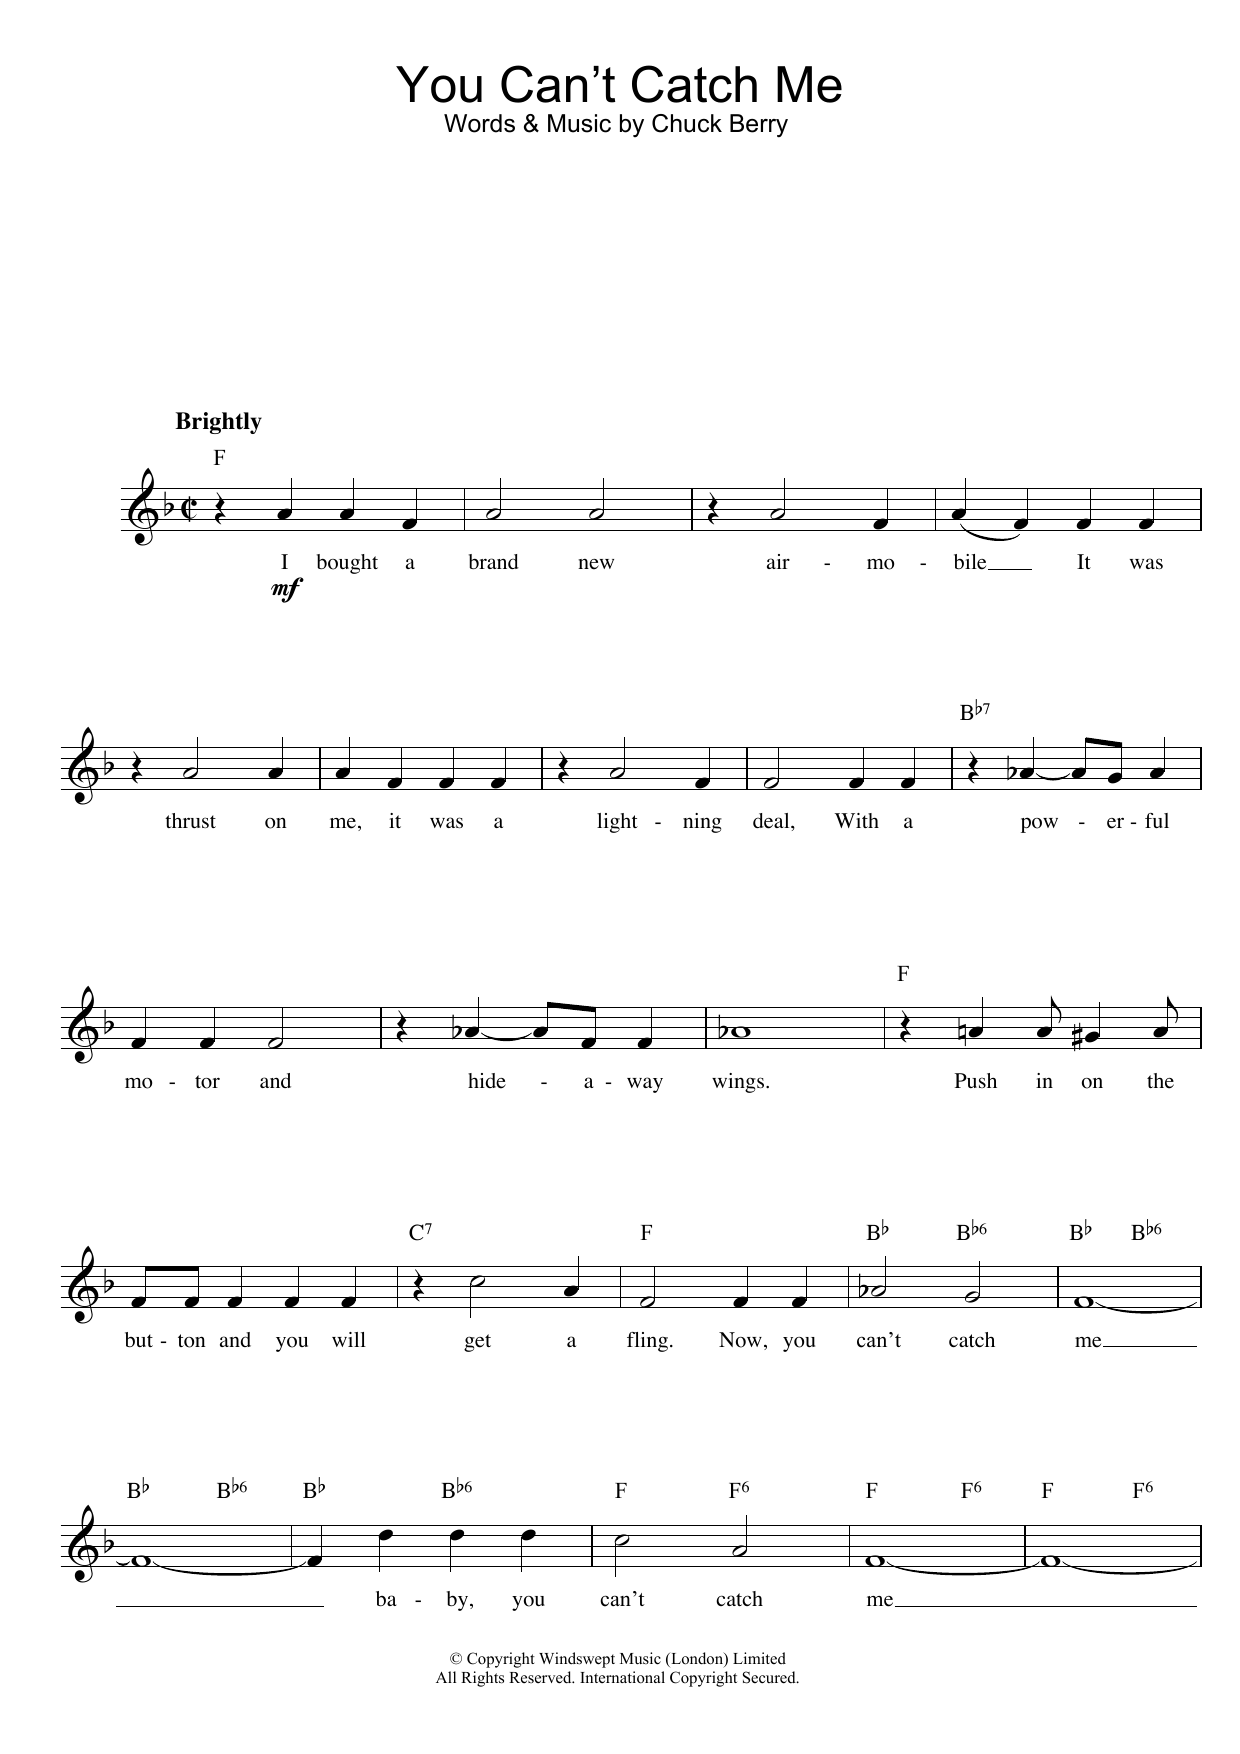 Chuck Berry You Can't Catch Me sheet music notes printable PDF score